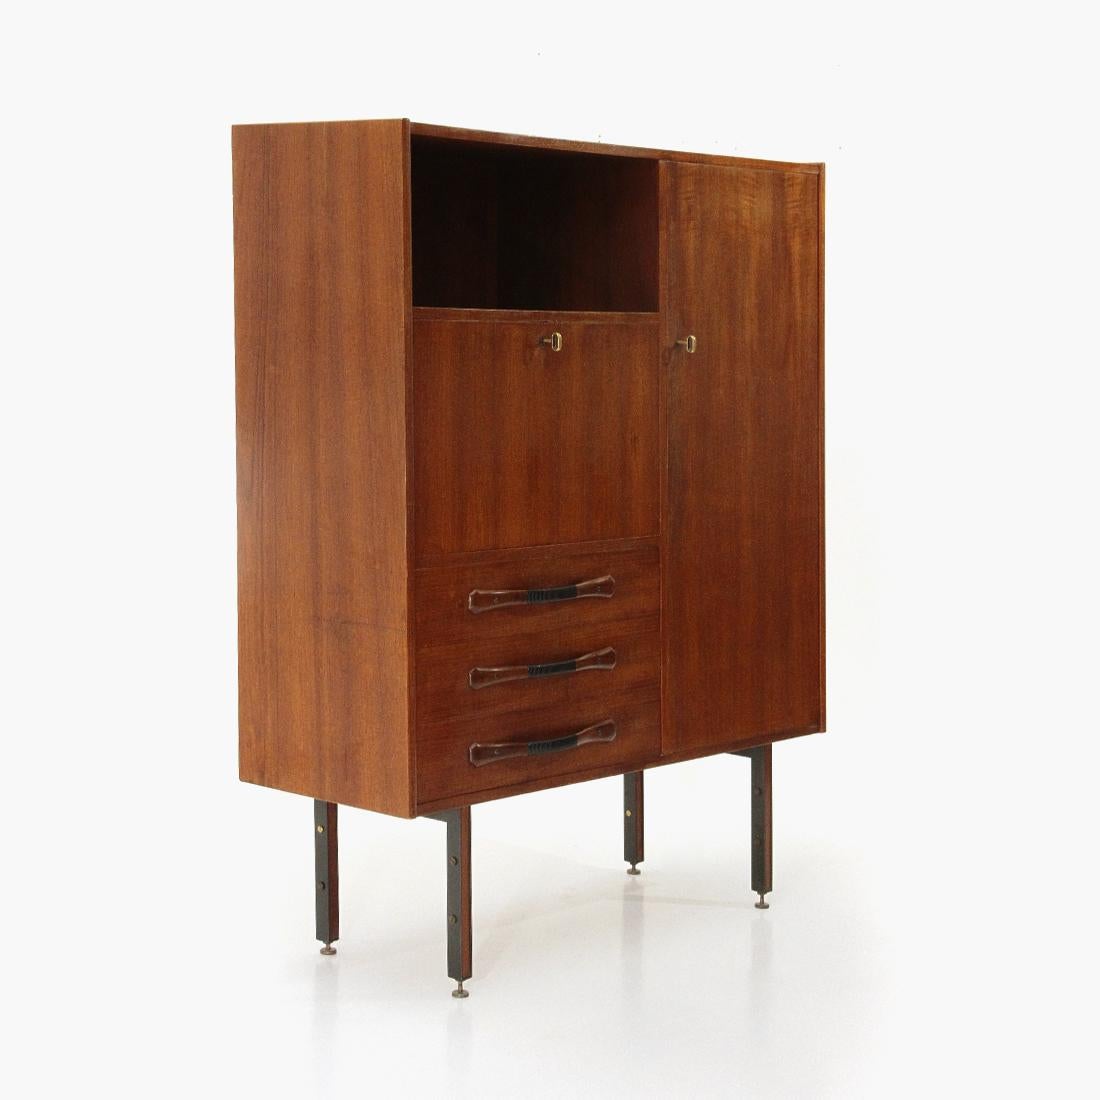 Italian Sideboard with Drawers and Flap, 1960s